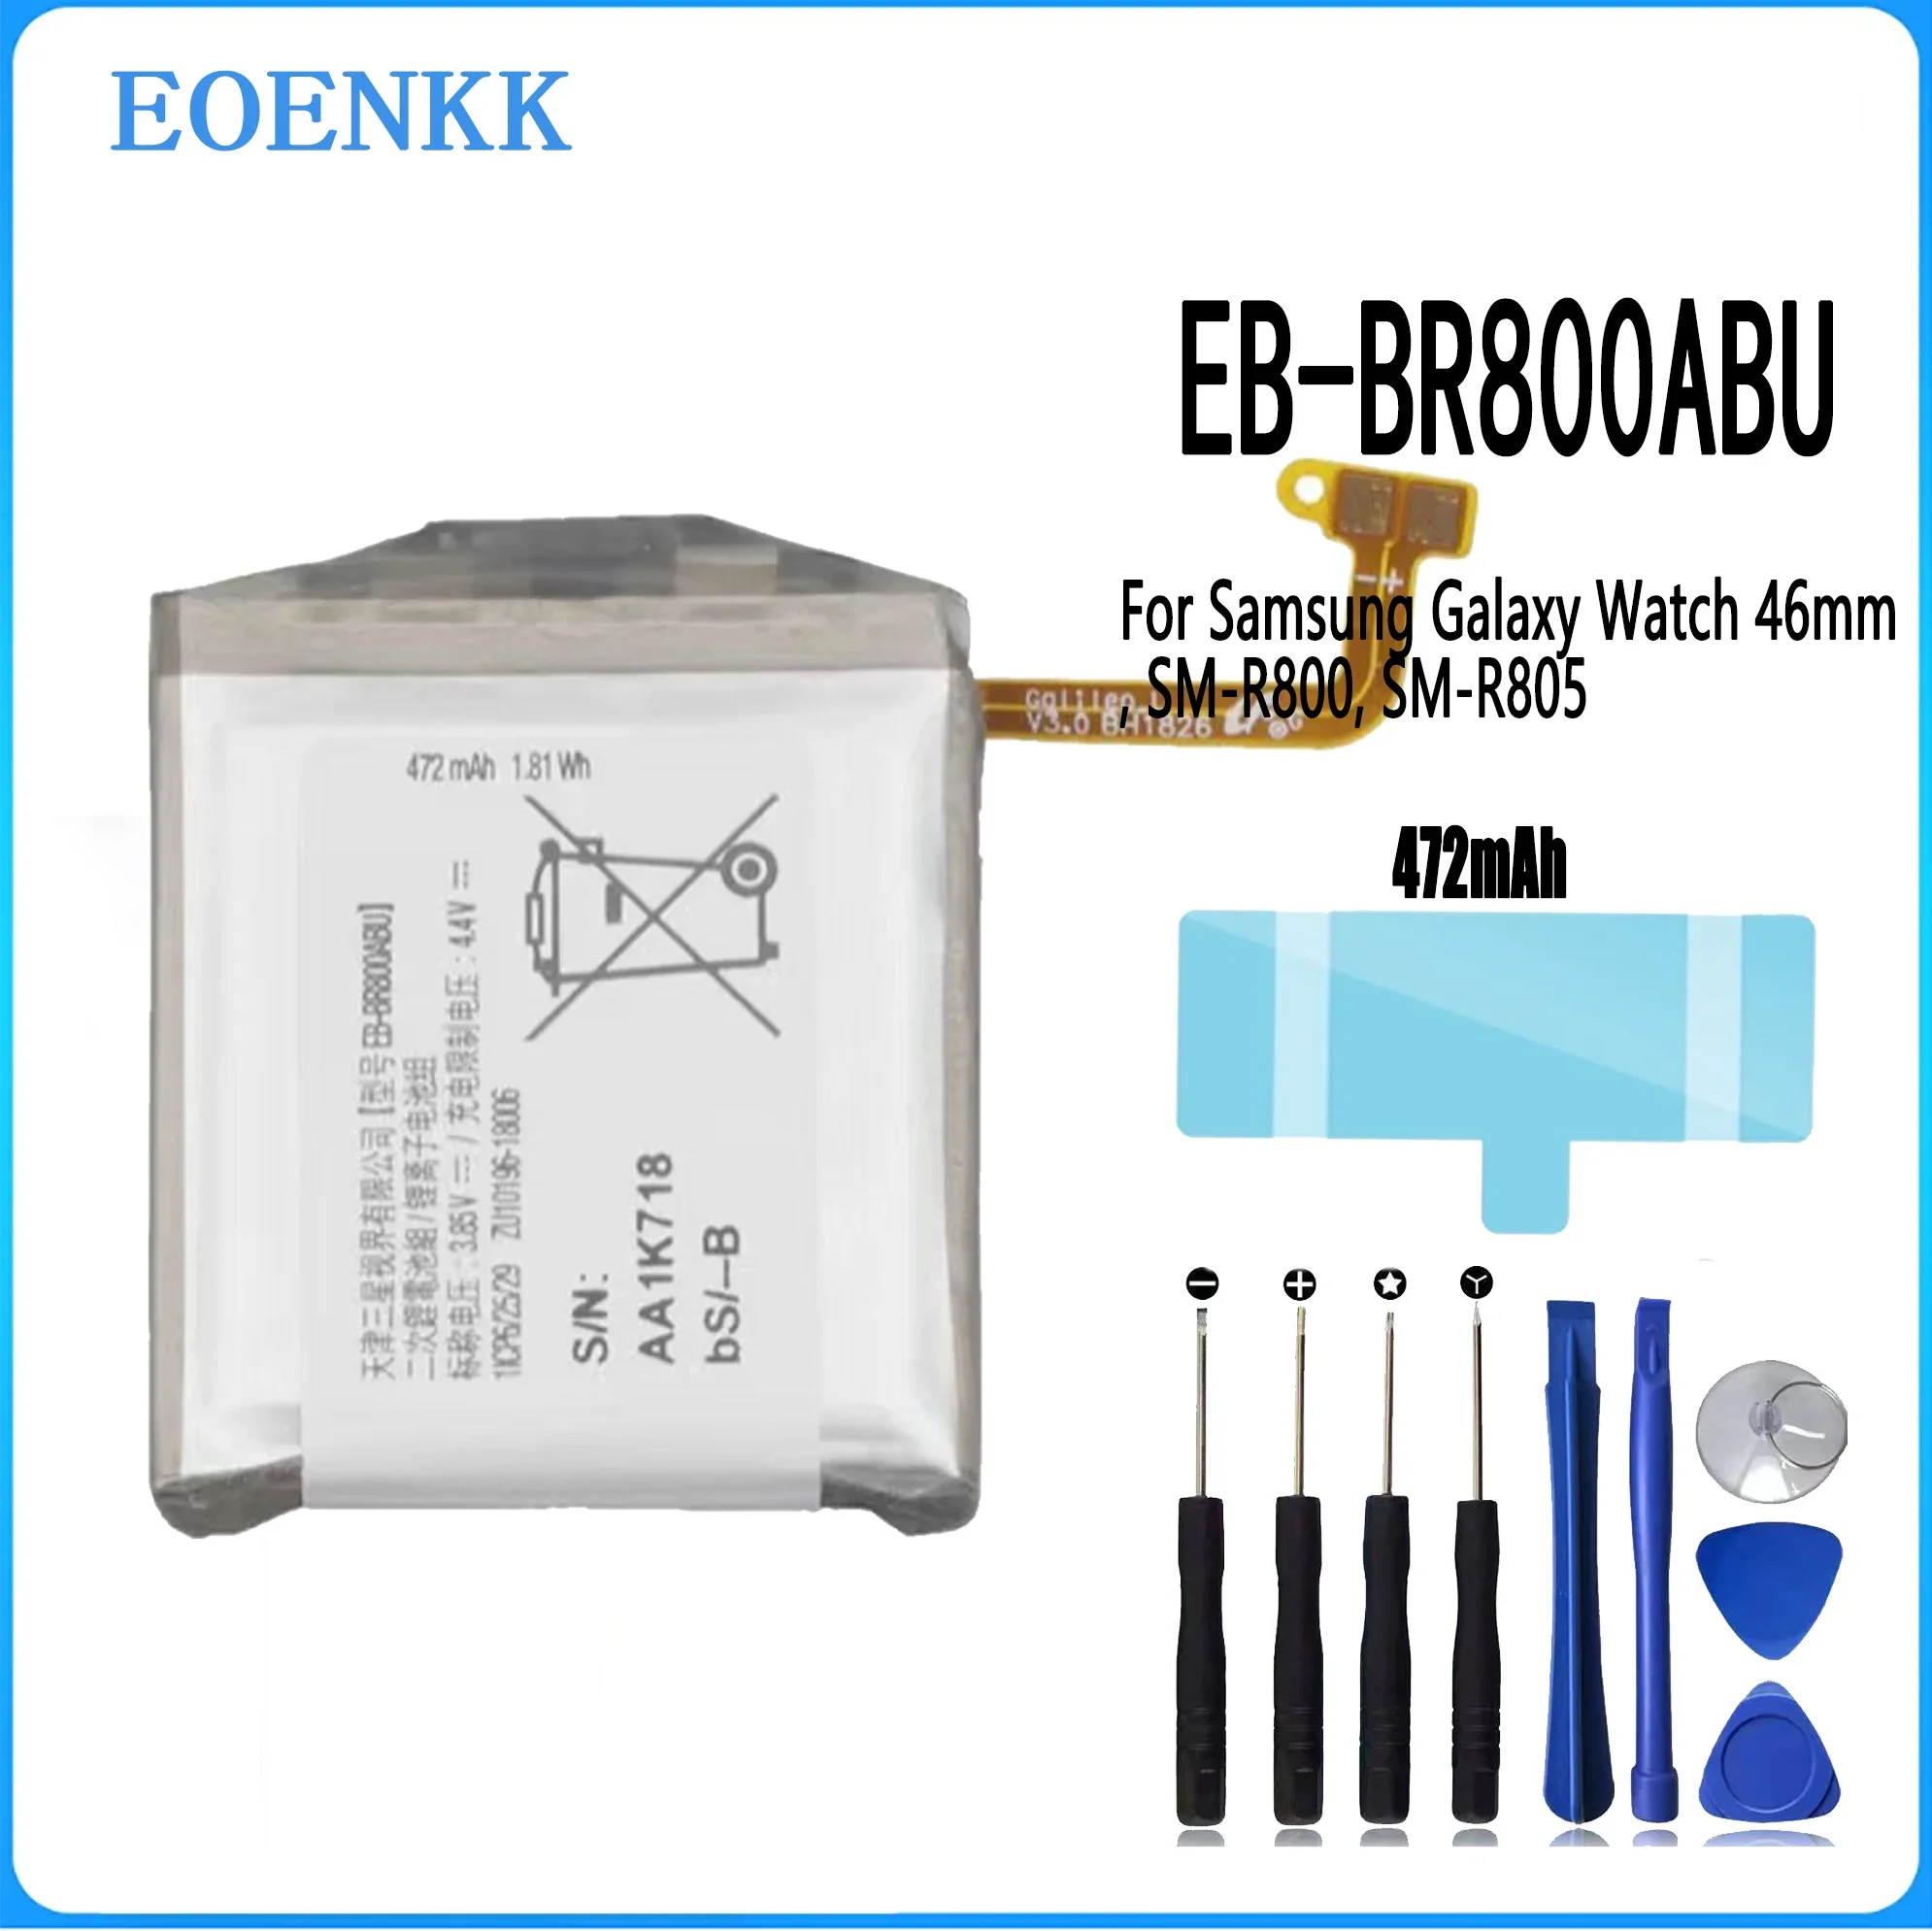 

EB-BR800ABU Highl Replacement Battery For Samsung Galaxy Watch 46mm, SM-R800, SM-R805 Highl Capacity Batteries+Tools